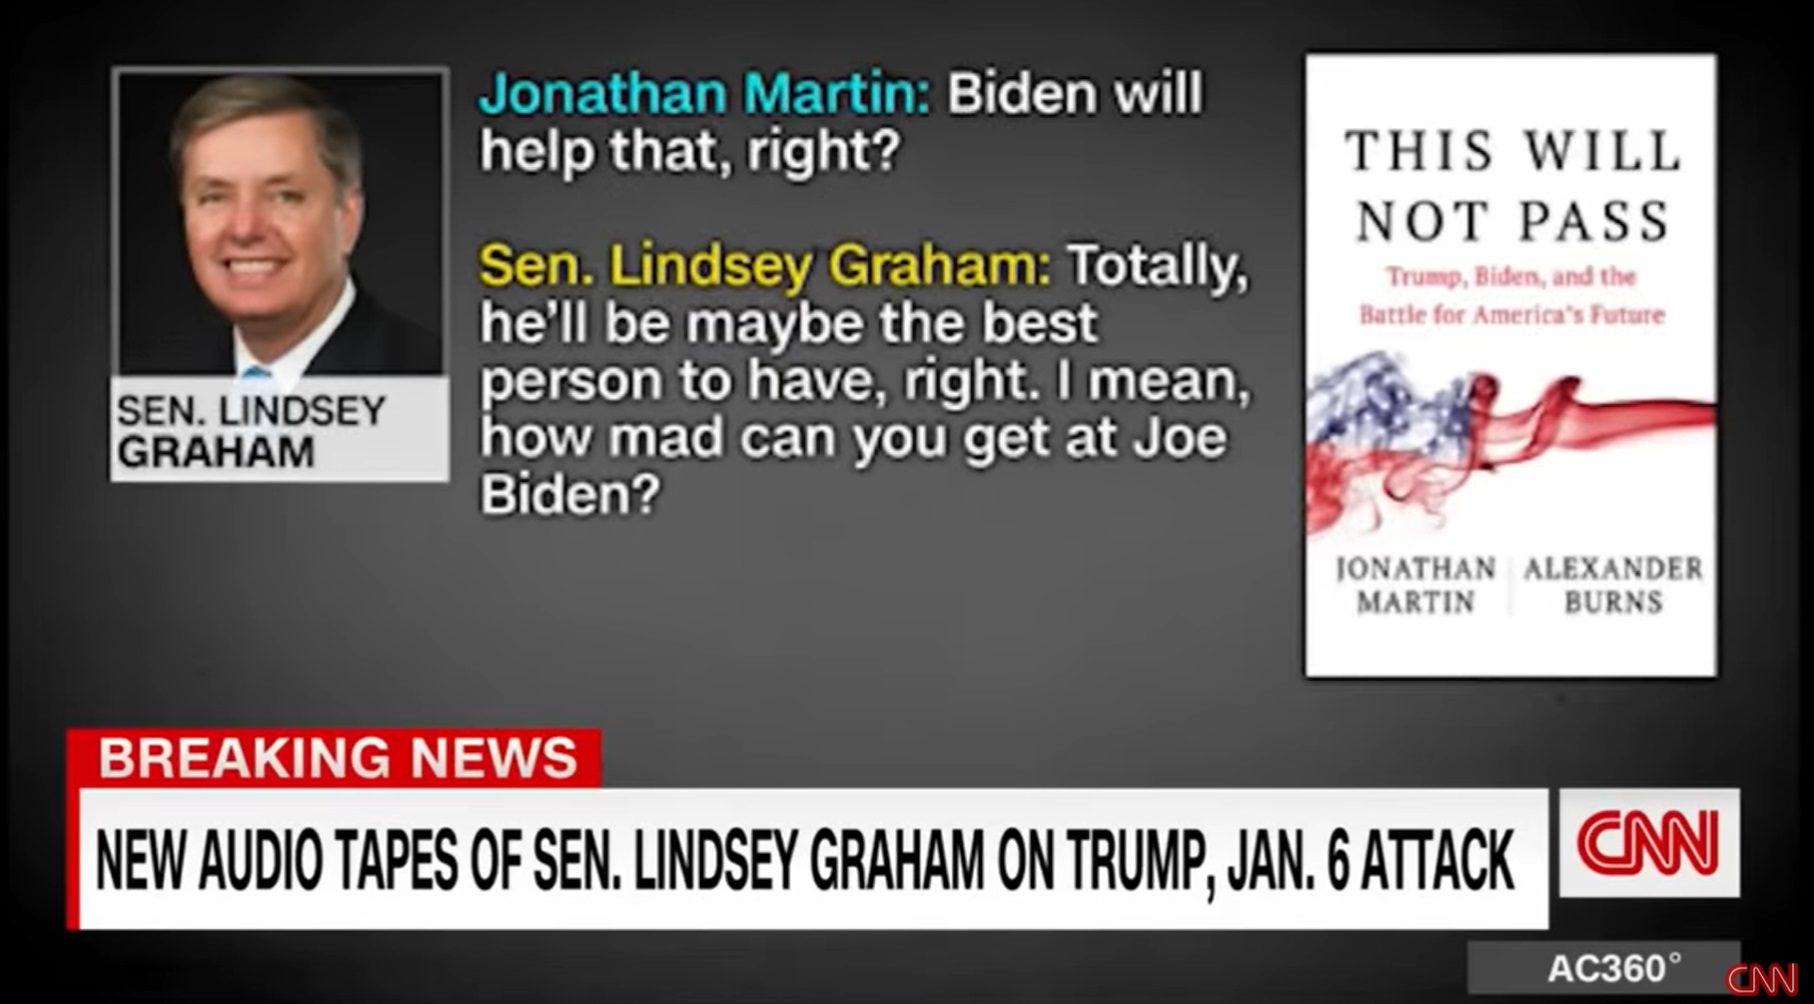 LISTEN: Bombshell Audio Reveals Lindsey Graham Claiming Nation Will Unify Around Biden After Jan. 6, Saying He’s ‘Maybe the Best Person to Have, Right?’